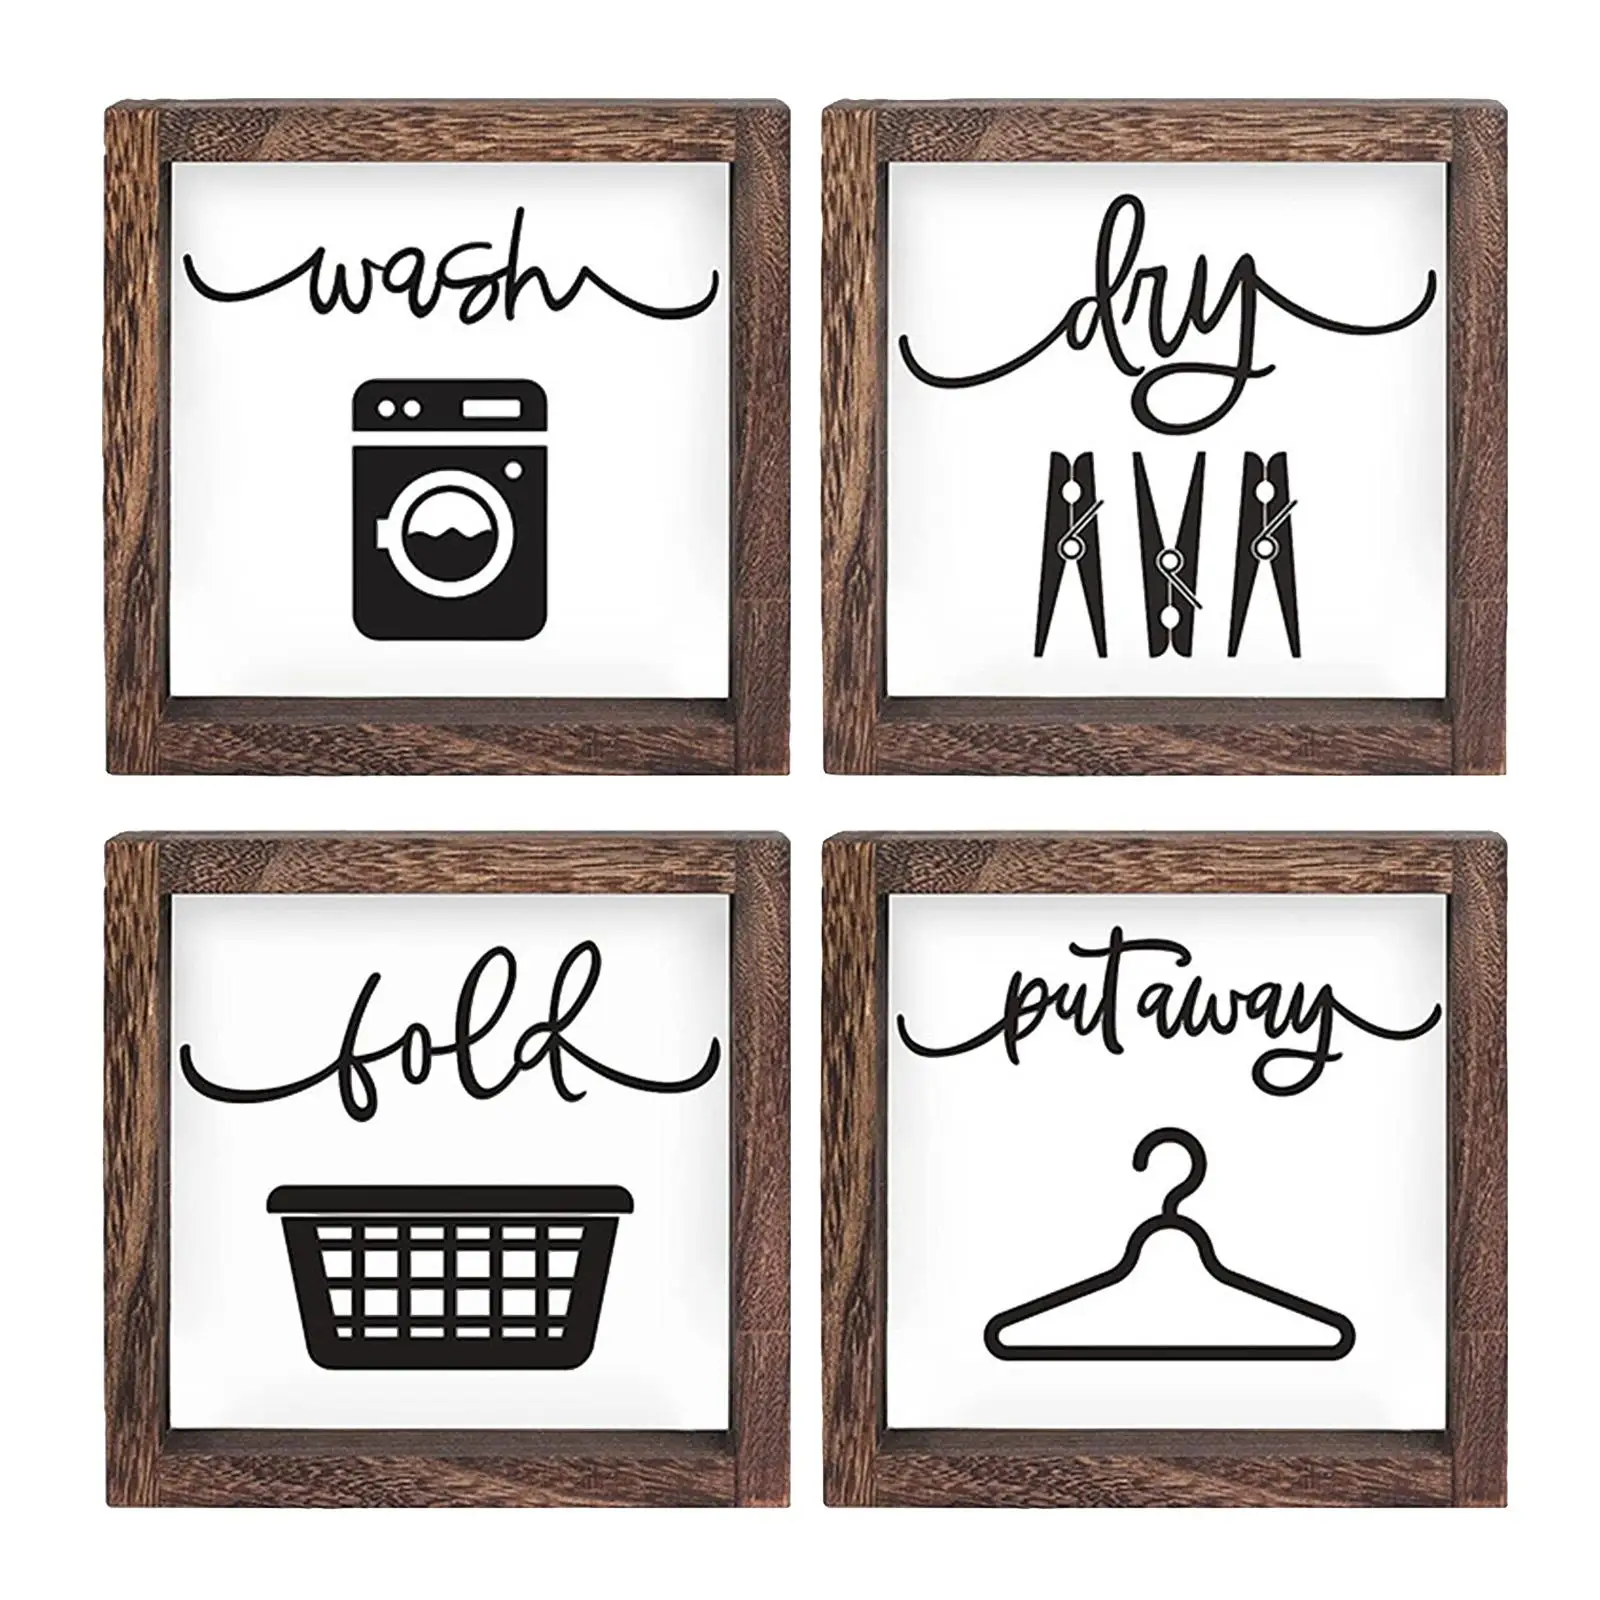 4x Wood Photo Frames Home Decor Tabletop and Wall Hanging Square Picture Frame Set for Bedroom Classroom Porch Photo Gallery